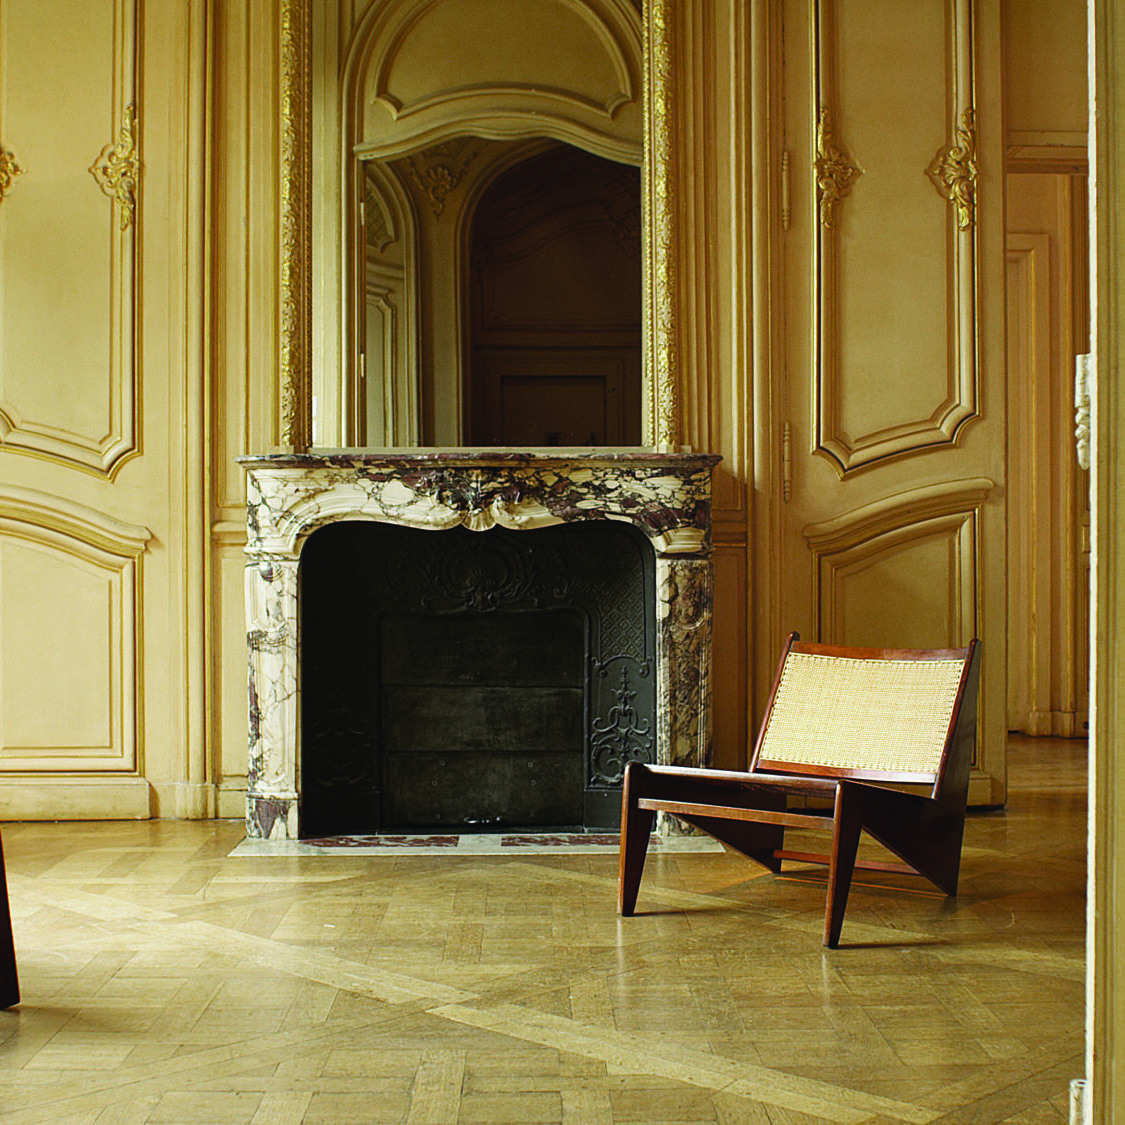 A still from Amie Siegel's Provenance,2013 featuring an empty room.